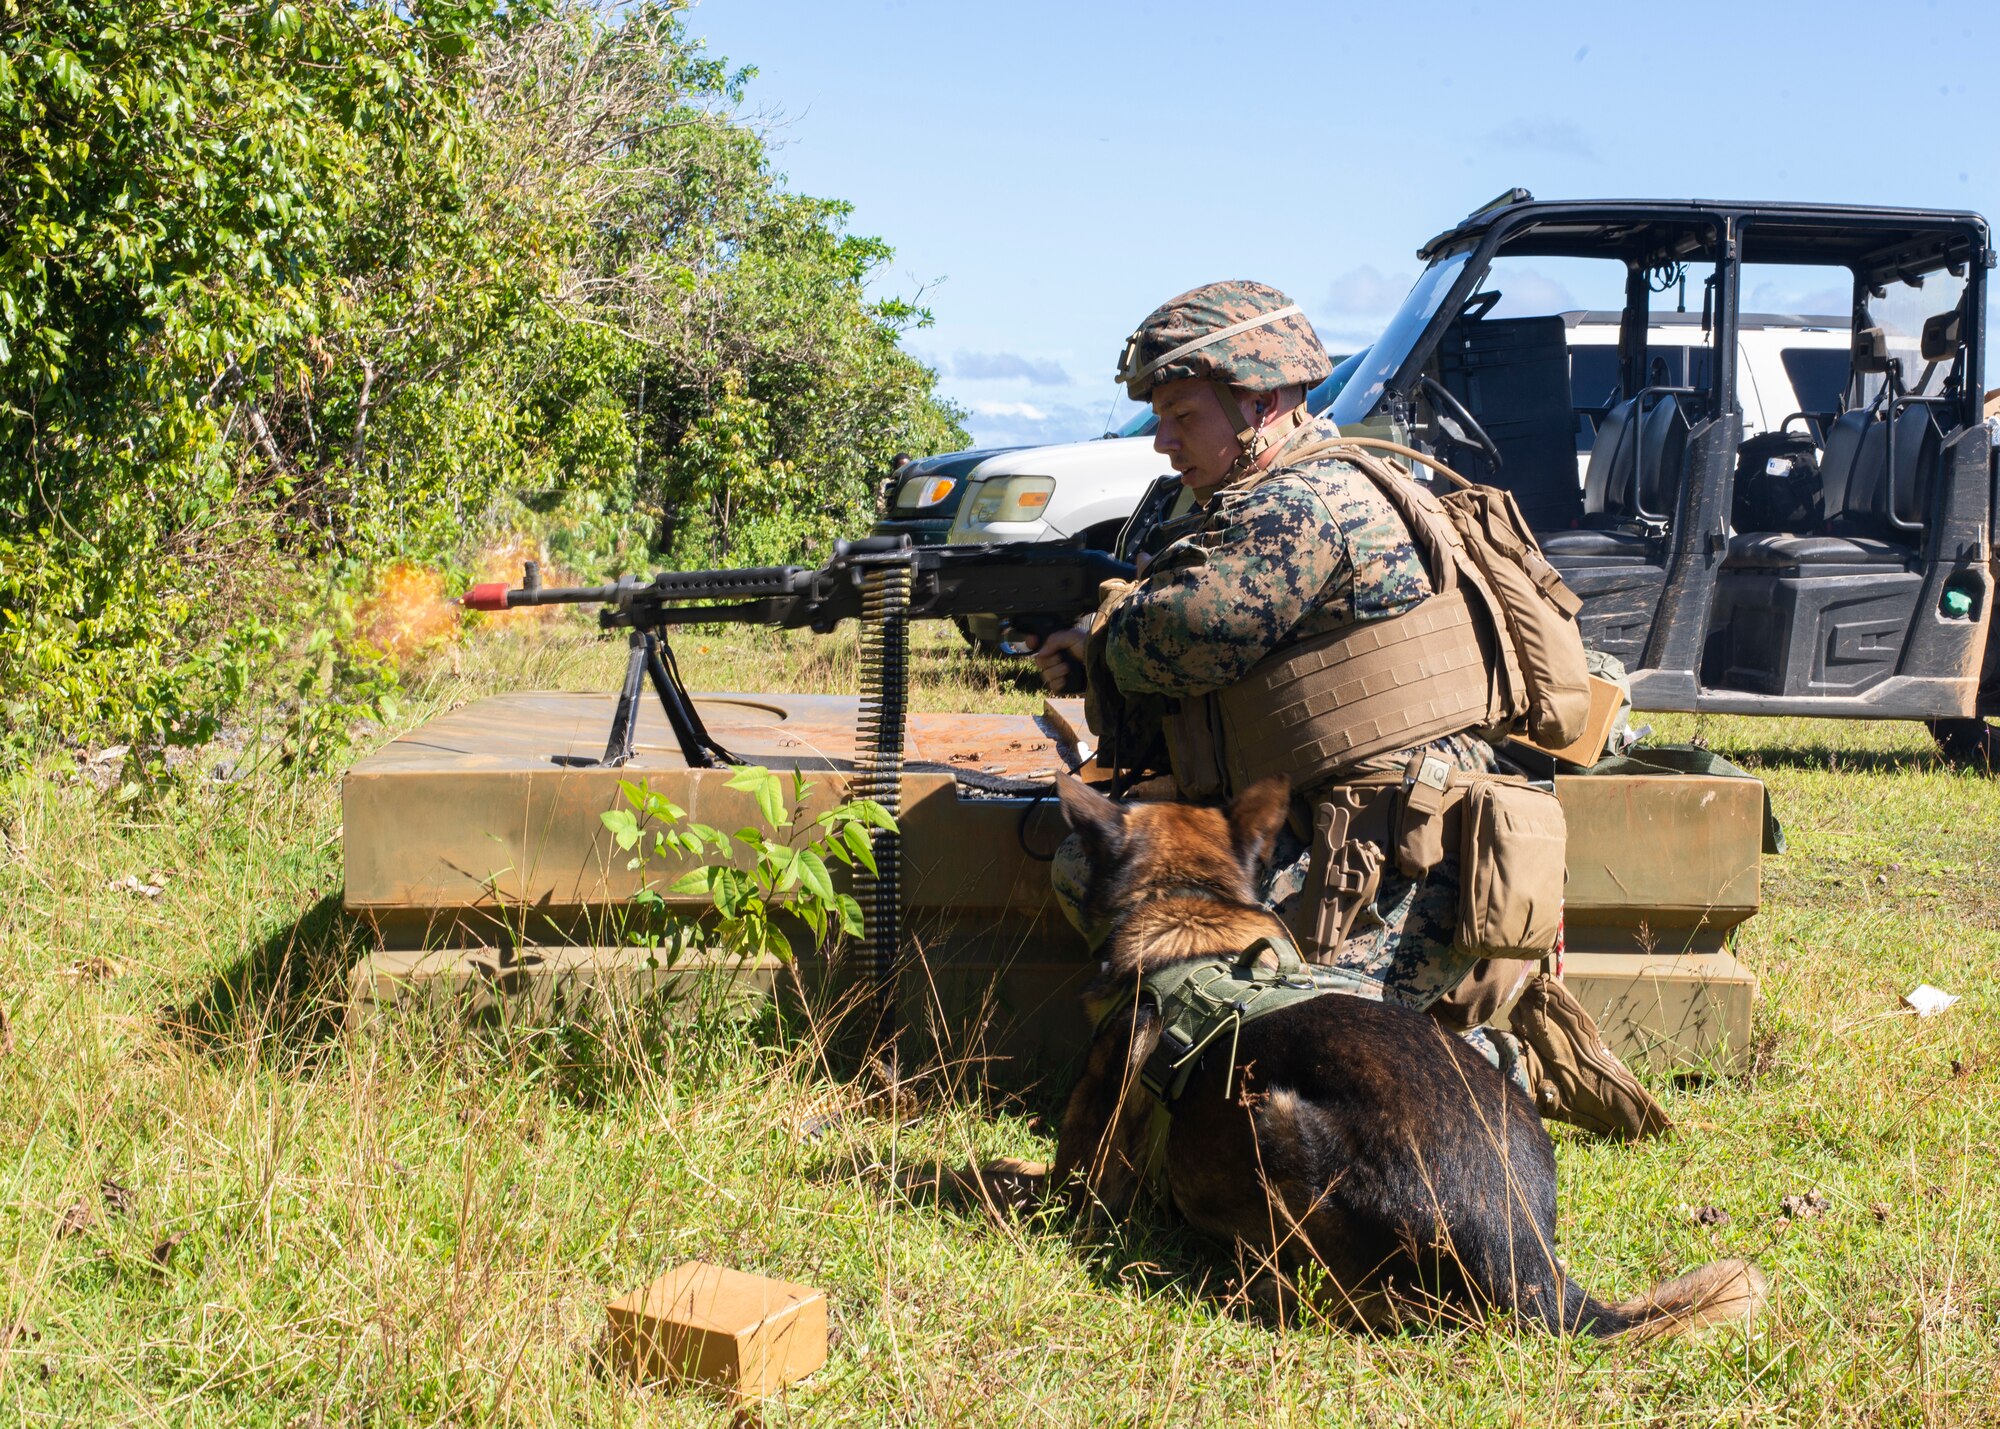 Lance Cpl. Andrew Lutz, 3rd Law Enforcement Battallion, fires a light machine gun to acclimate OOhio to the sounds of combat on Andersen Air Force Base, Guam Nov. 20. Marines and Airmen exchanged MWD techiques to enhance joint mission effectivness. (U.S. Air Force photo by Staff Sgt. Nicholas Crisp)